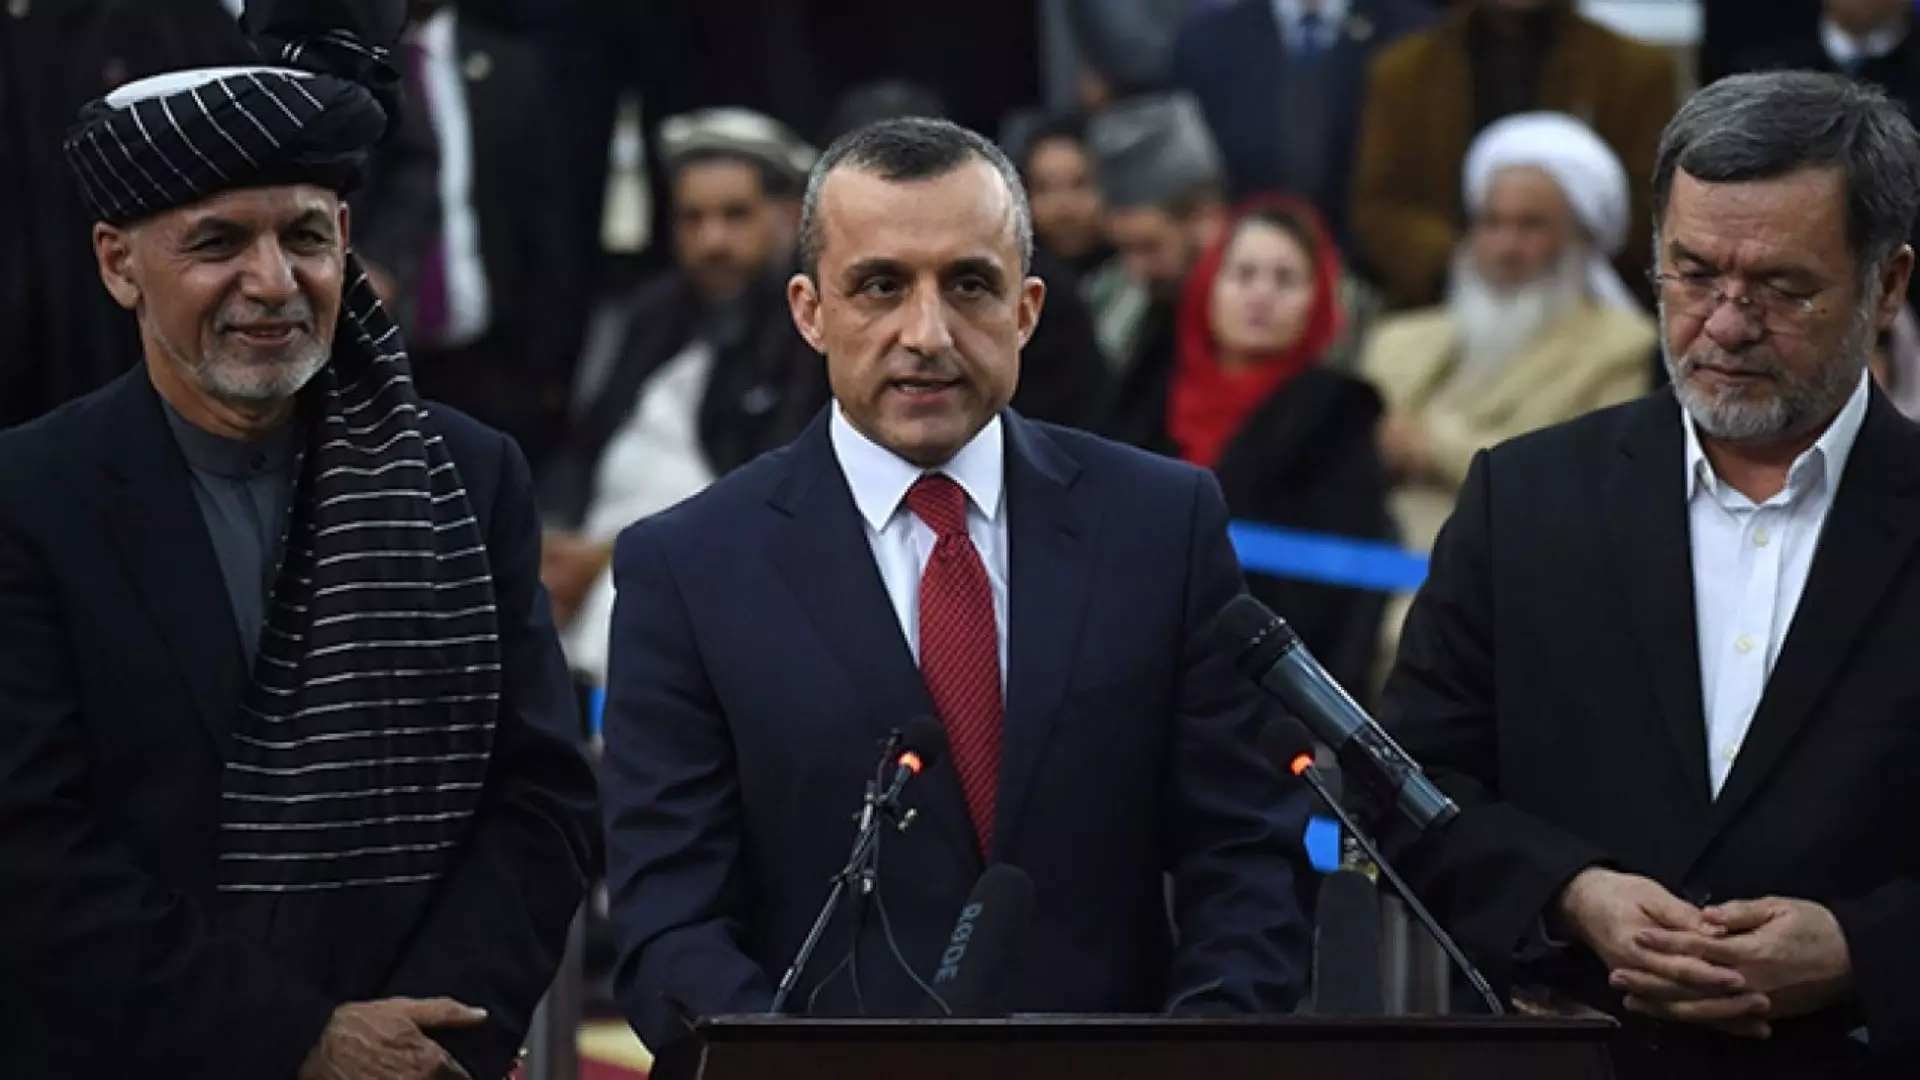 The Opposition to Taliban Lead by Afghan Vice President Amrullah Saleh